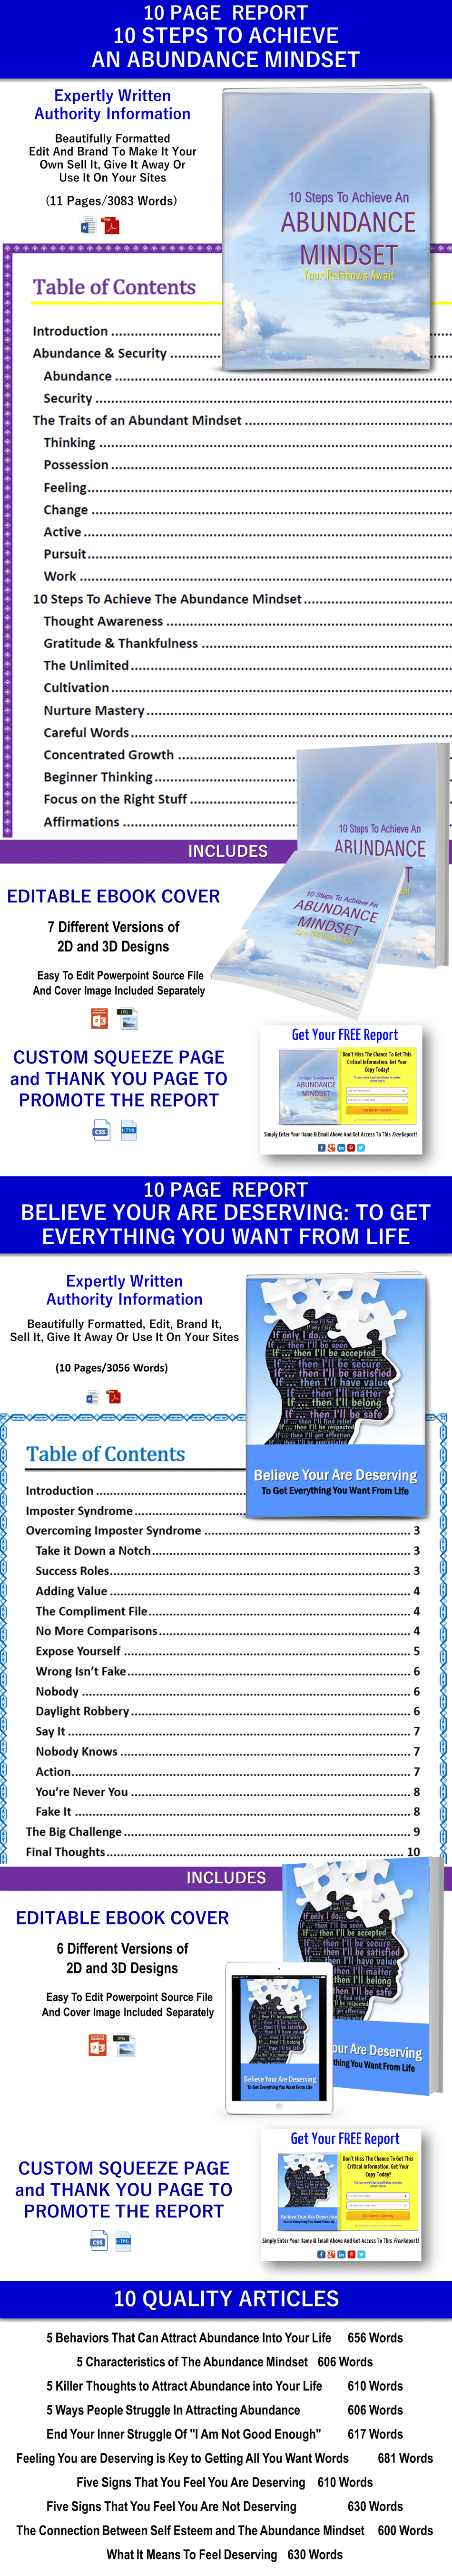 10 Steps To An Abundance Mindset and Feel Deserving Reports and Articles PLR